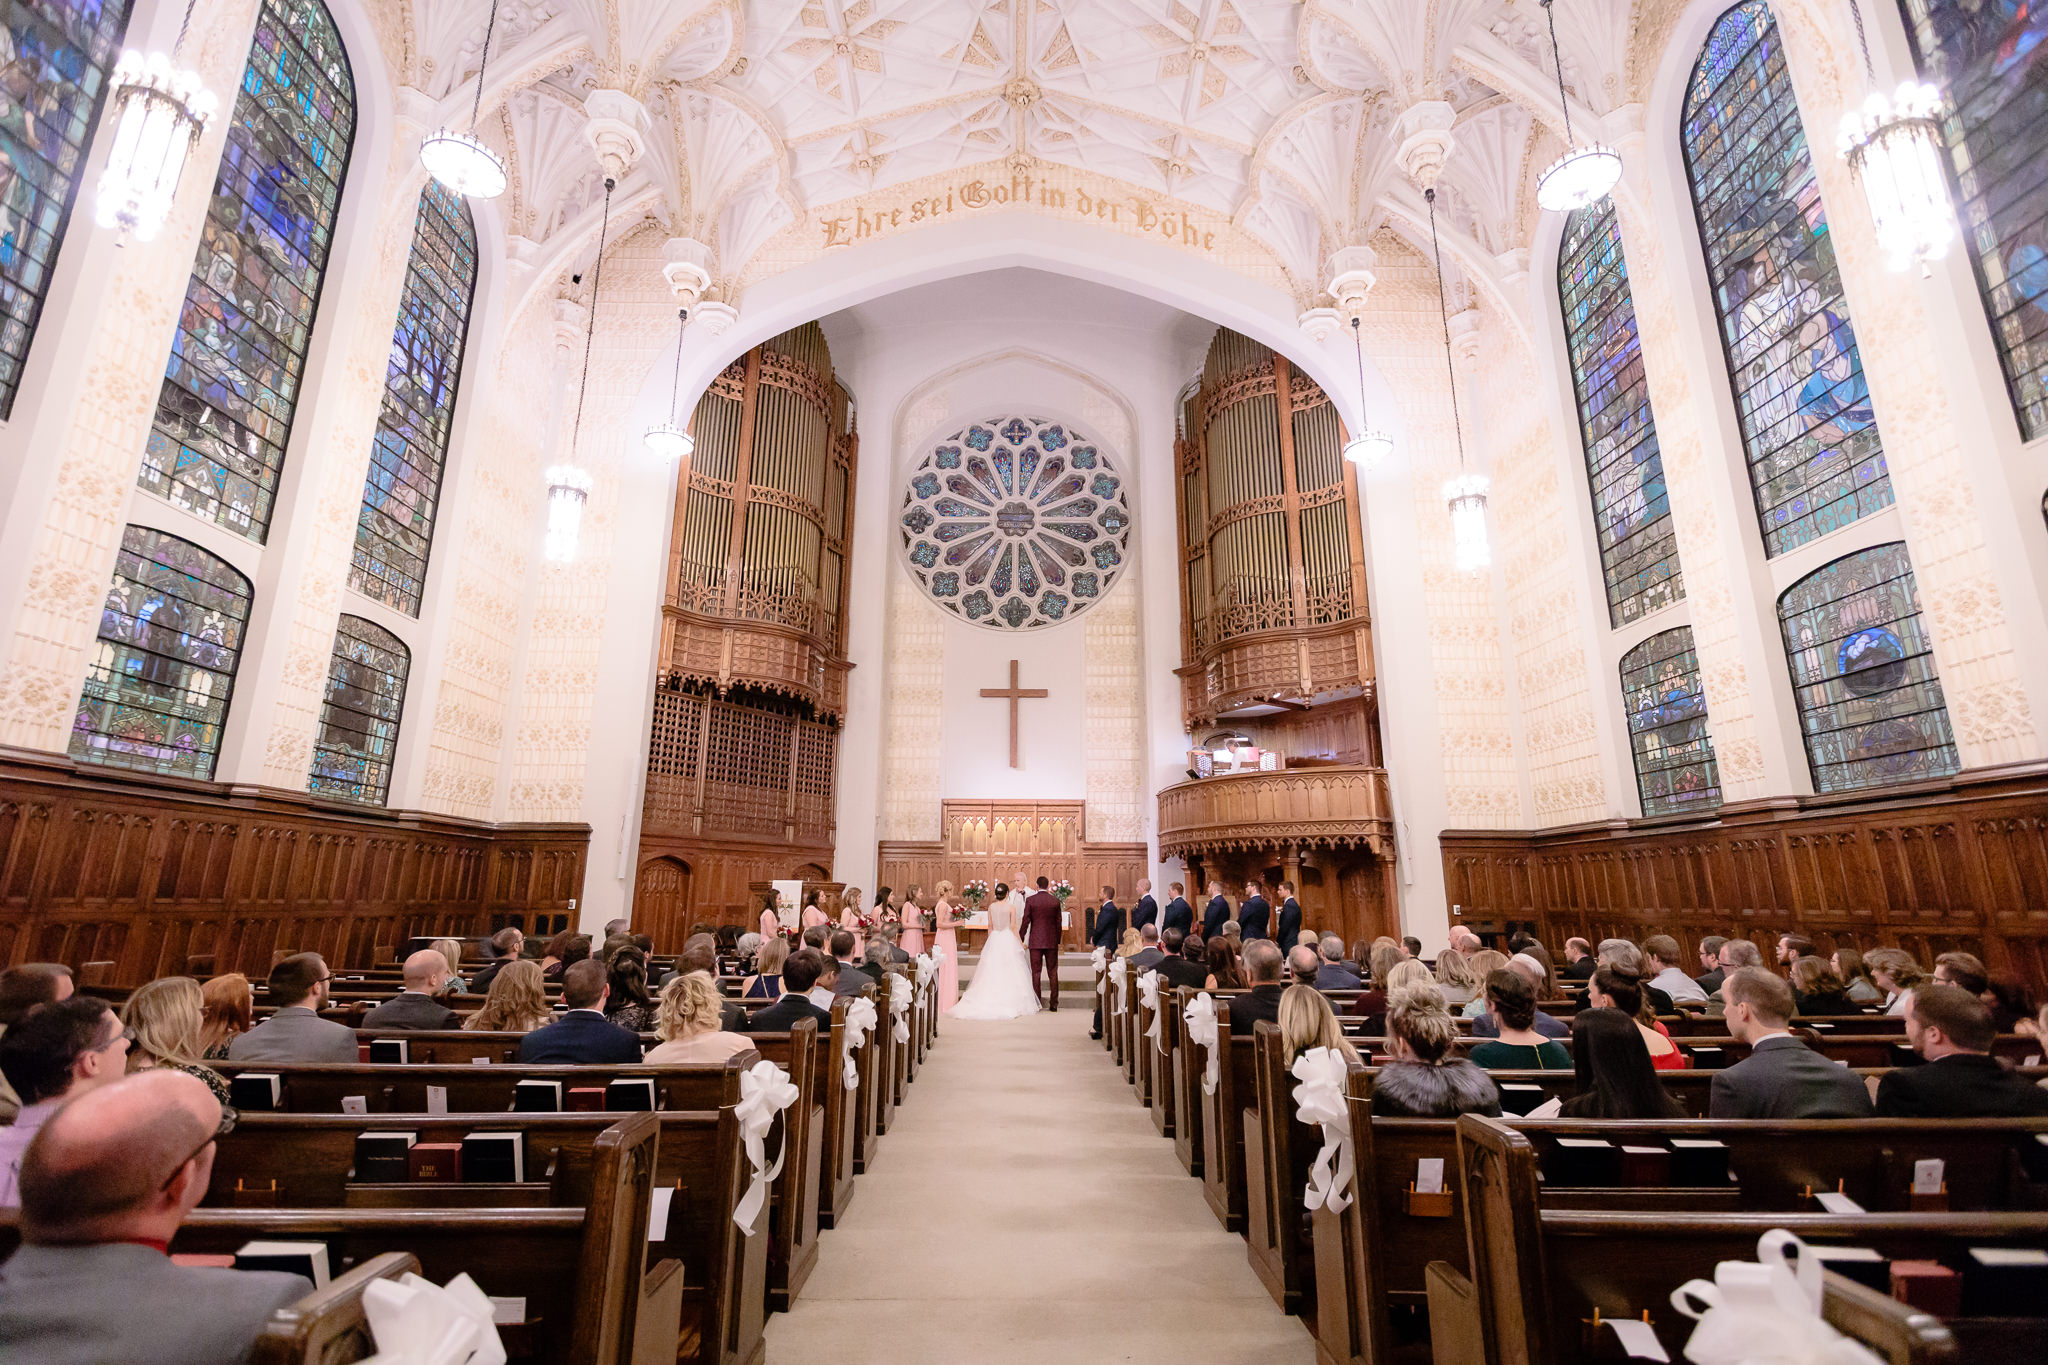 Wedding ceremony in the Smithfield United Church of Christ in downtown Pittsburgh